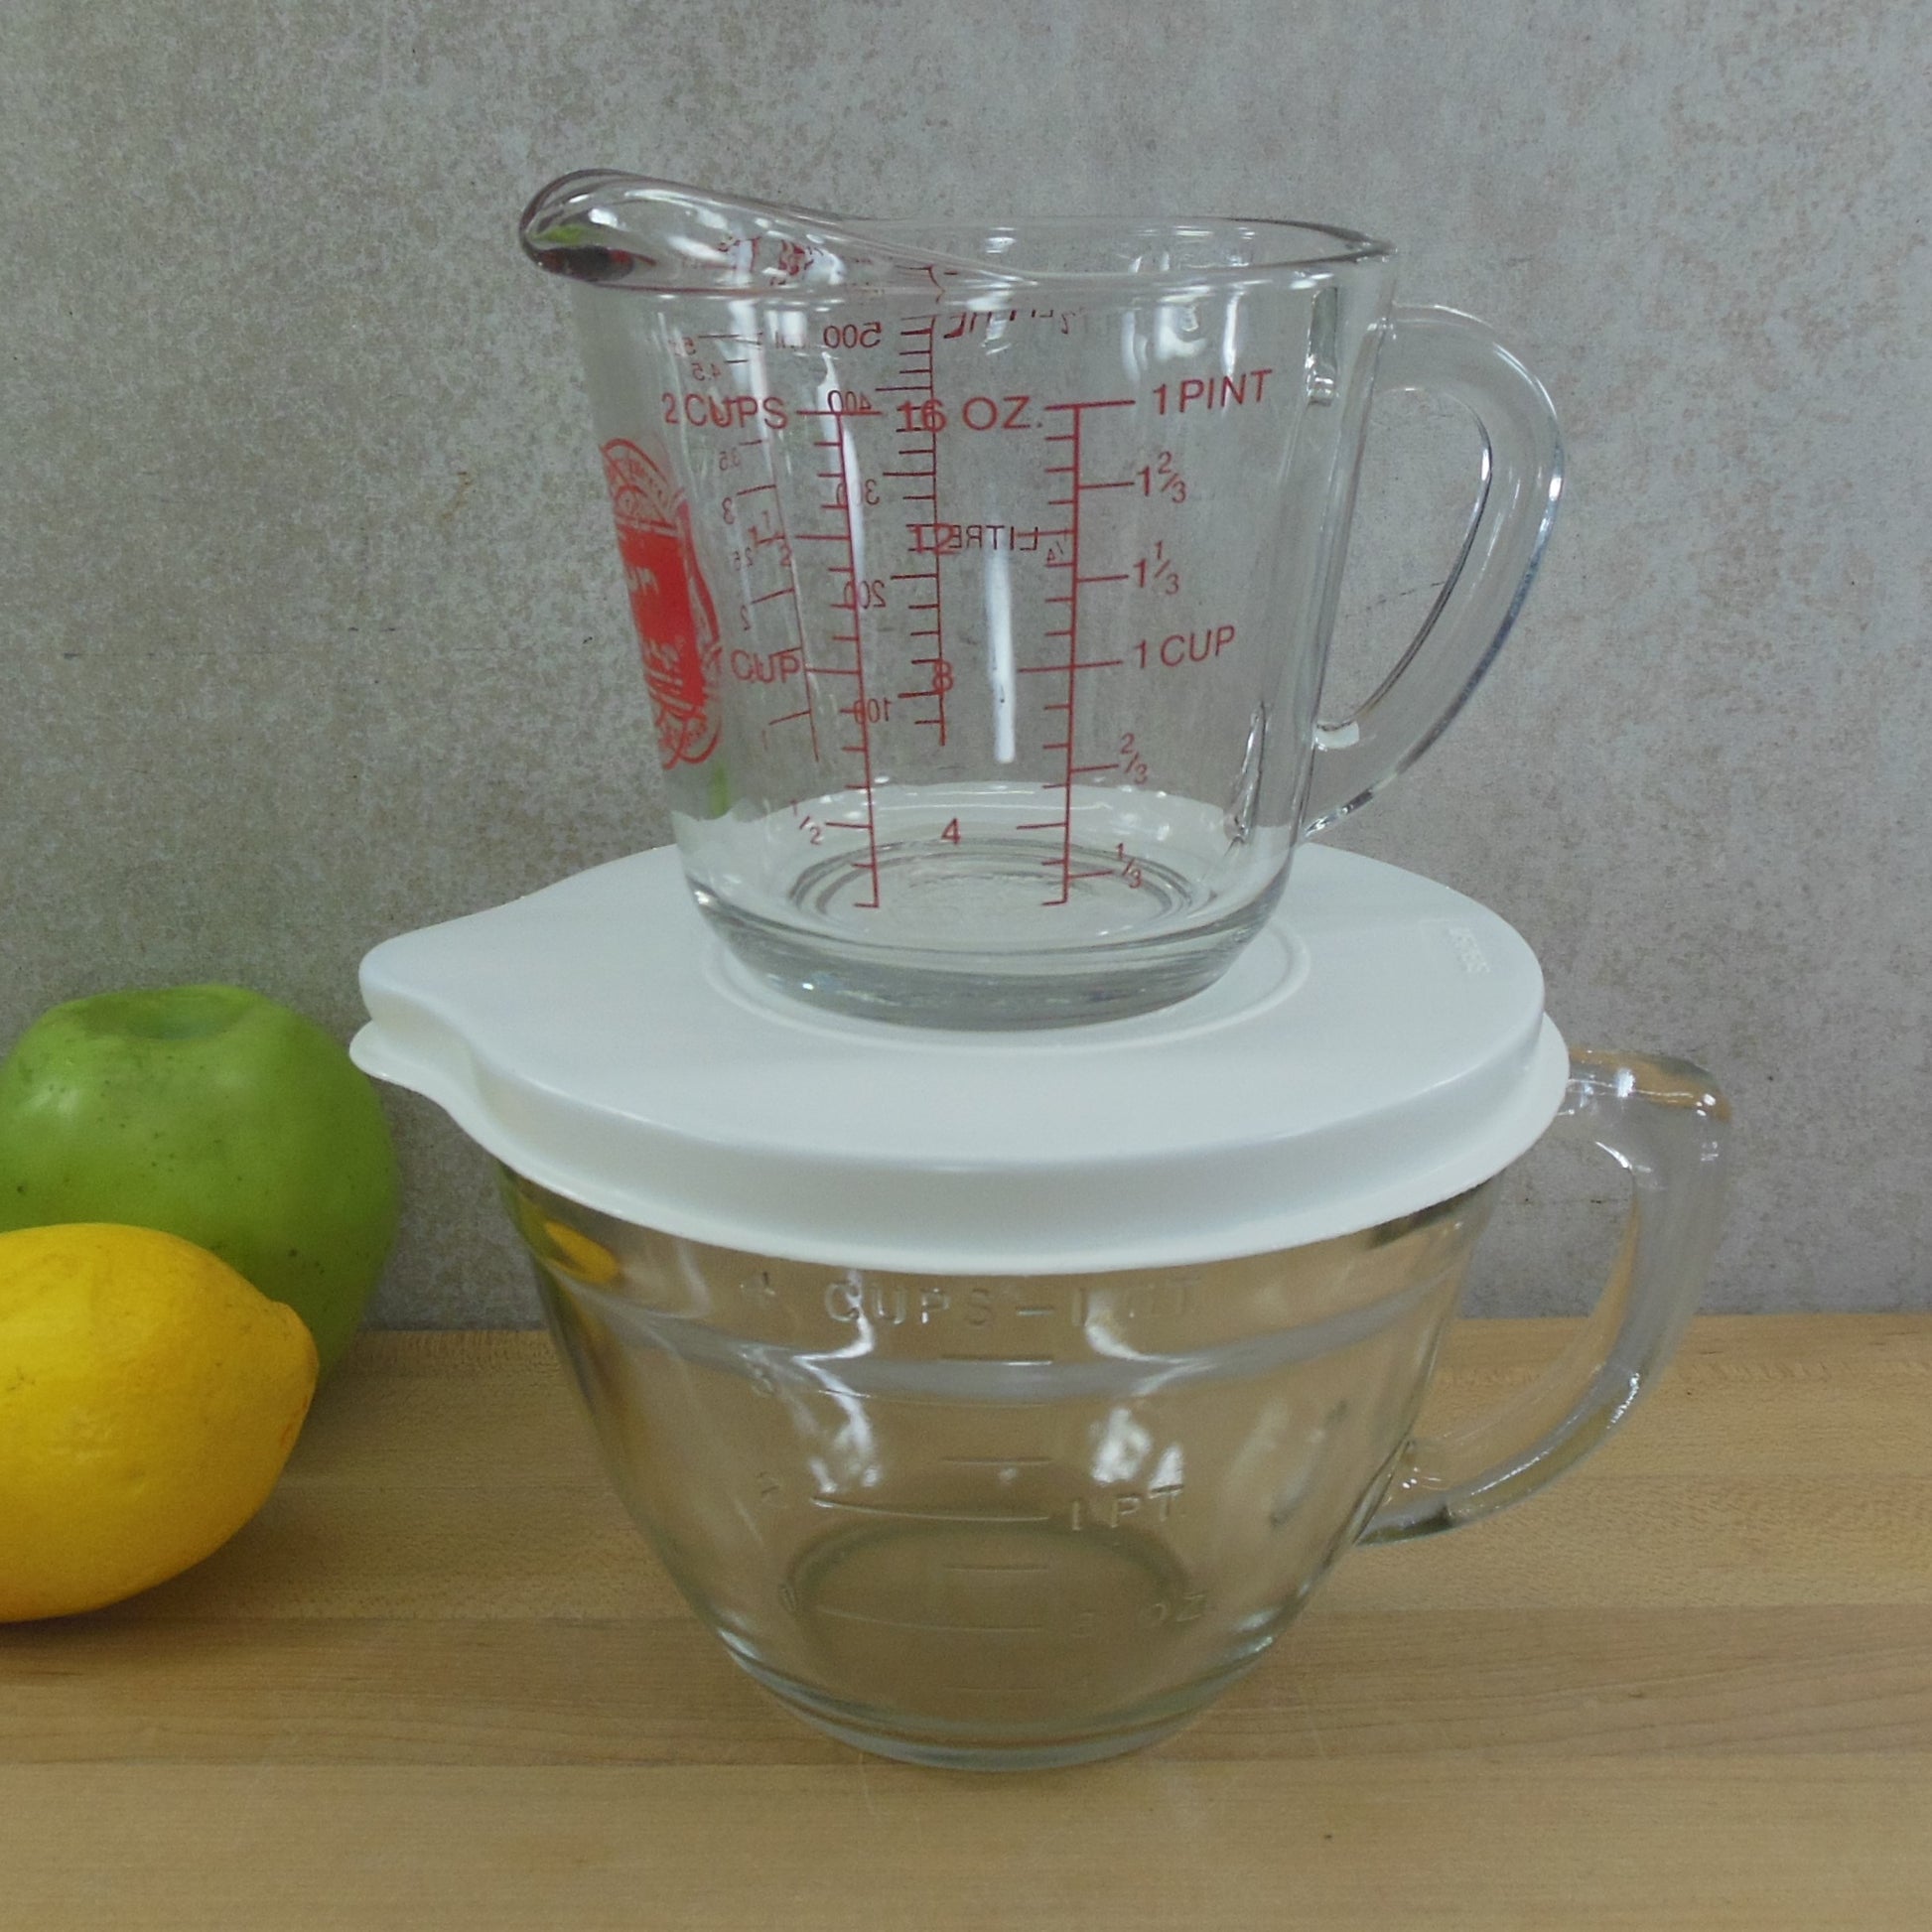 Pampered Chef INOX Stainless Cookie Dough Melon Ball Proportioner Scoo